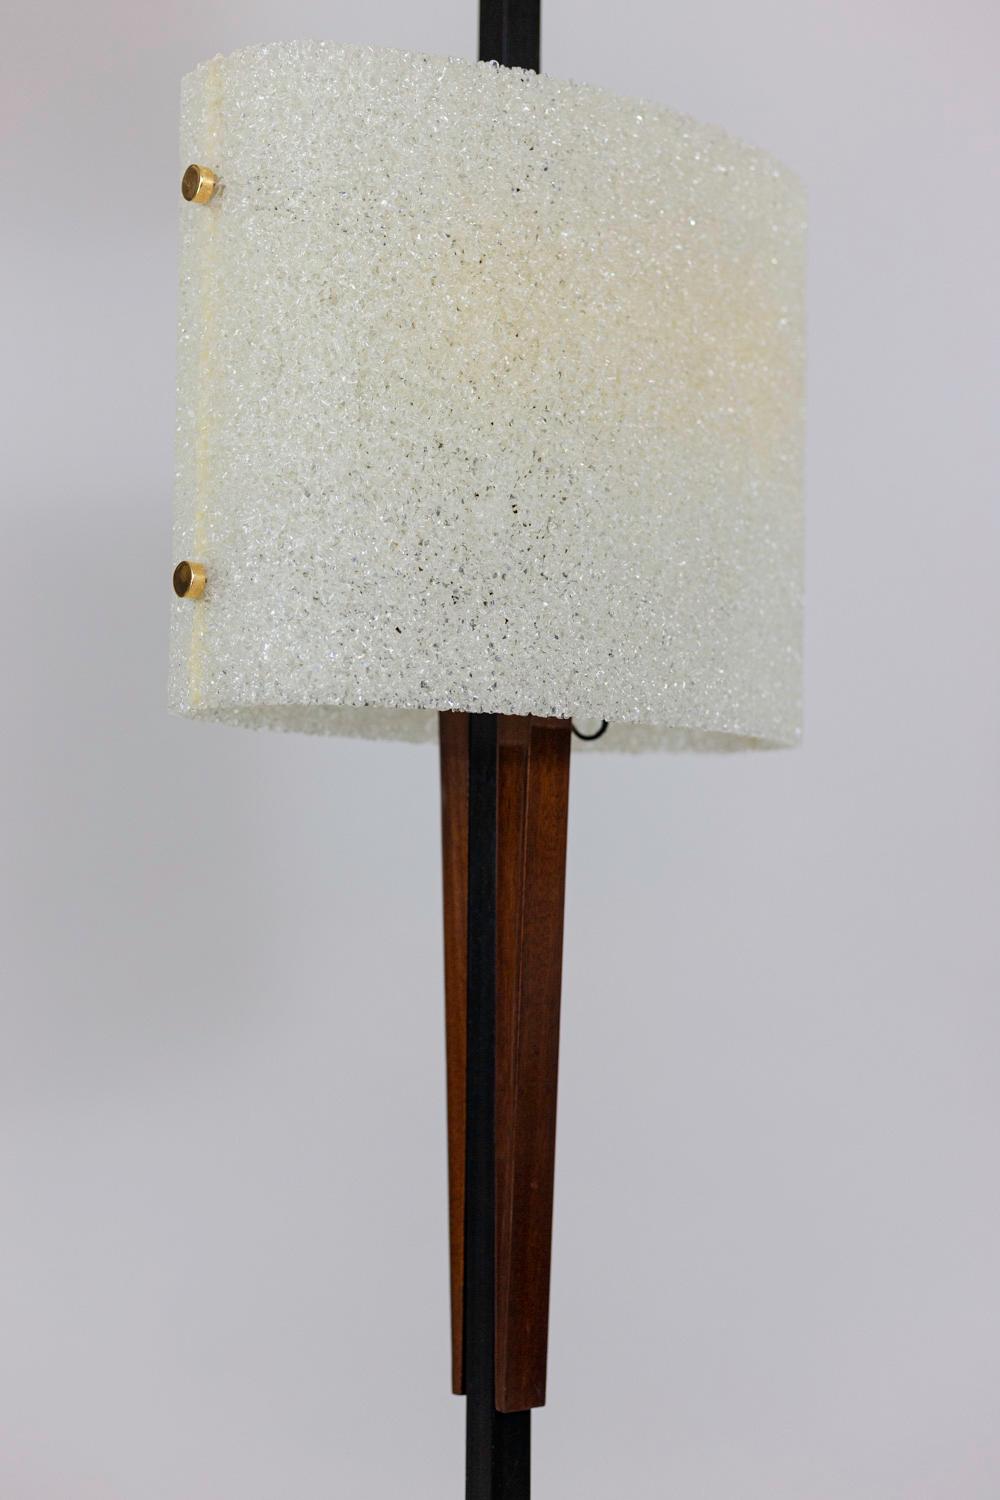 Mid-20th Century Floor Lamp in Granite Resin and Wood, 1950s For Sale